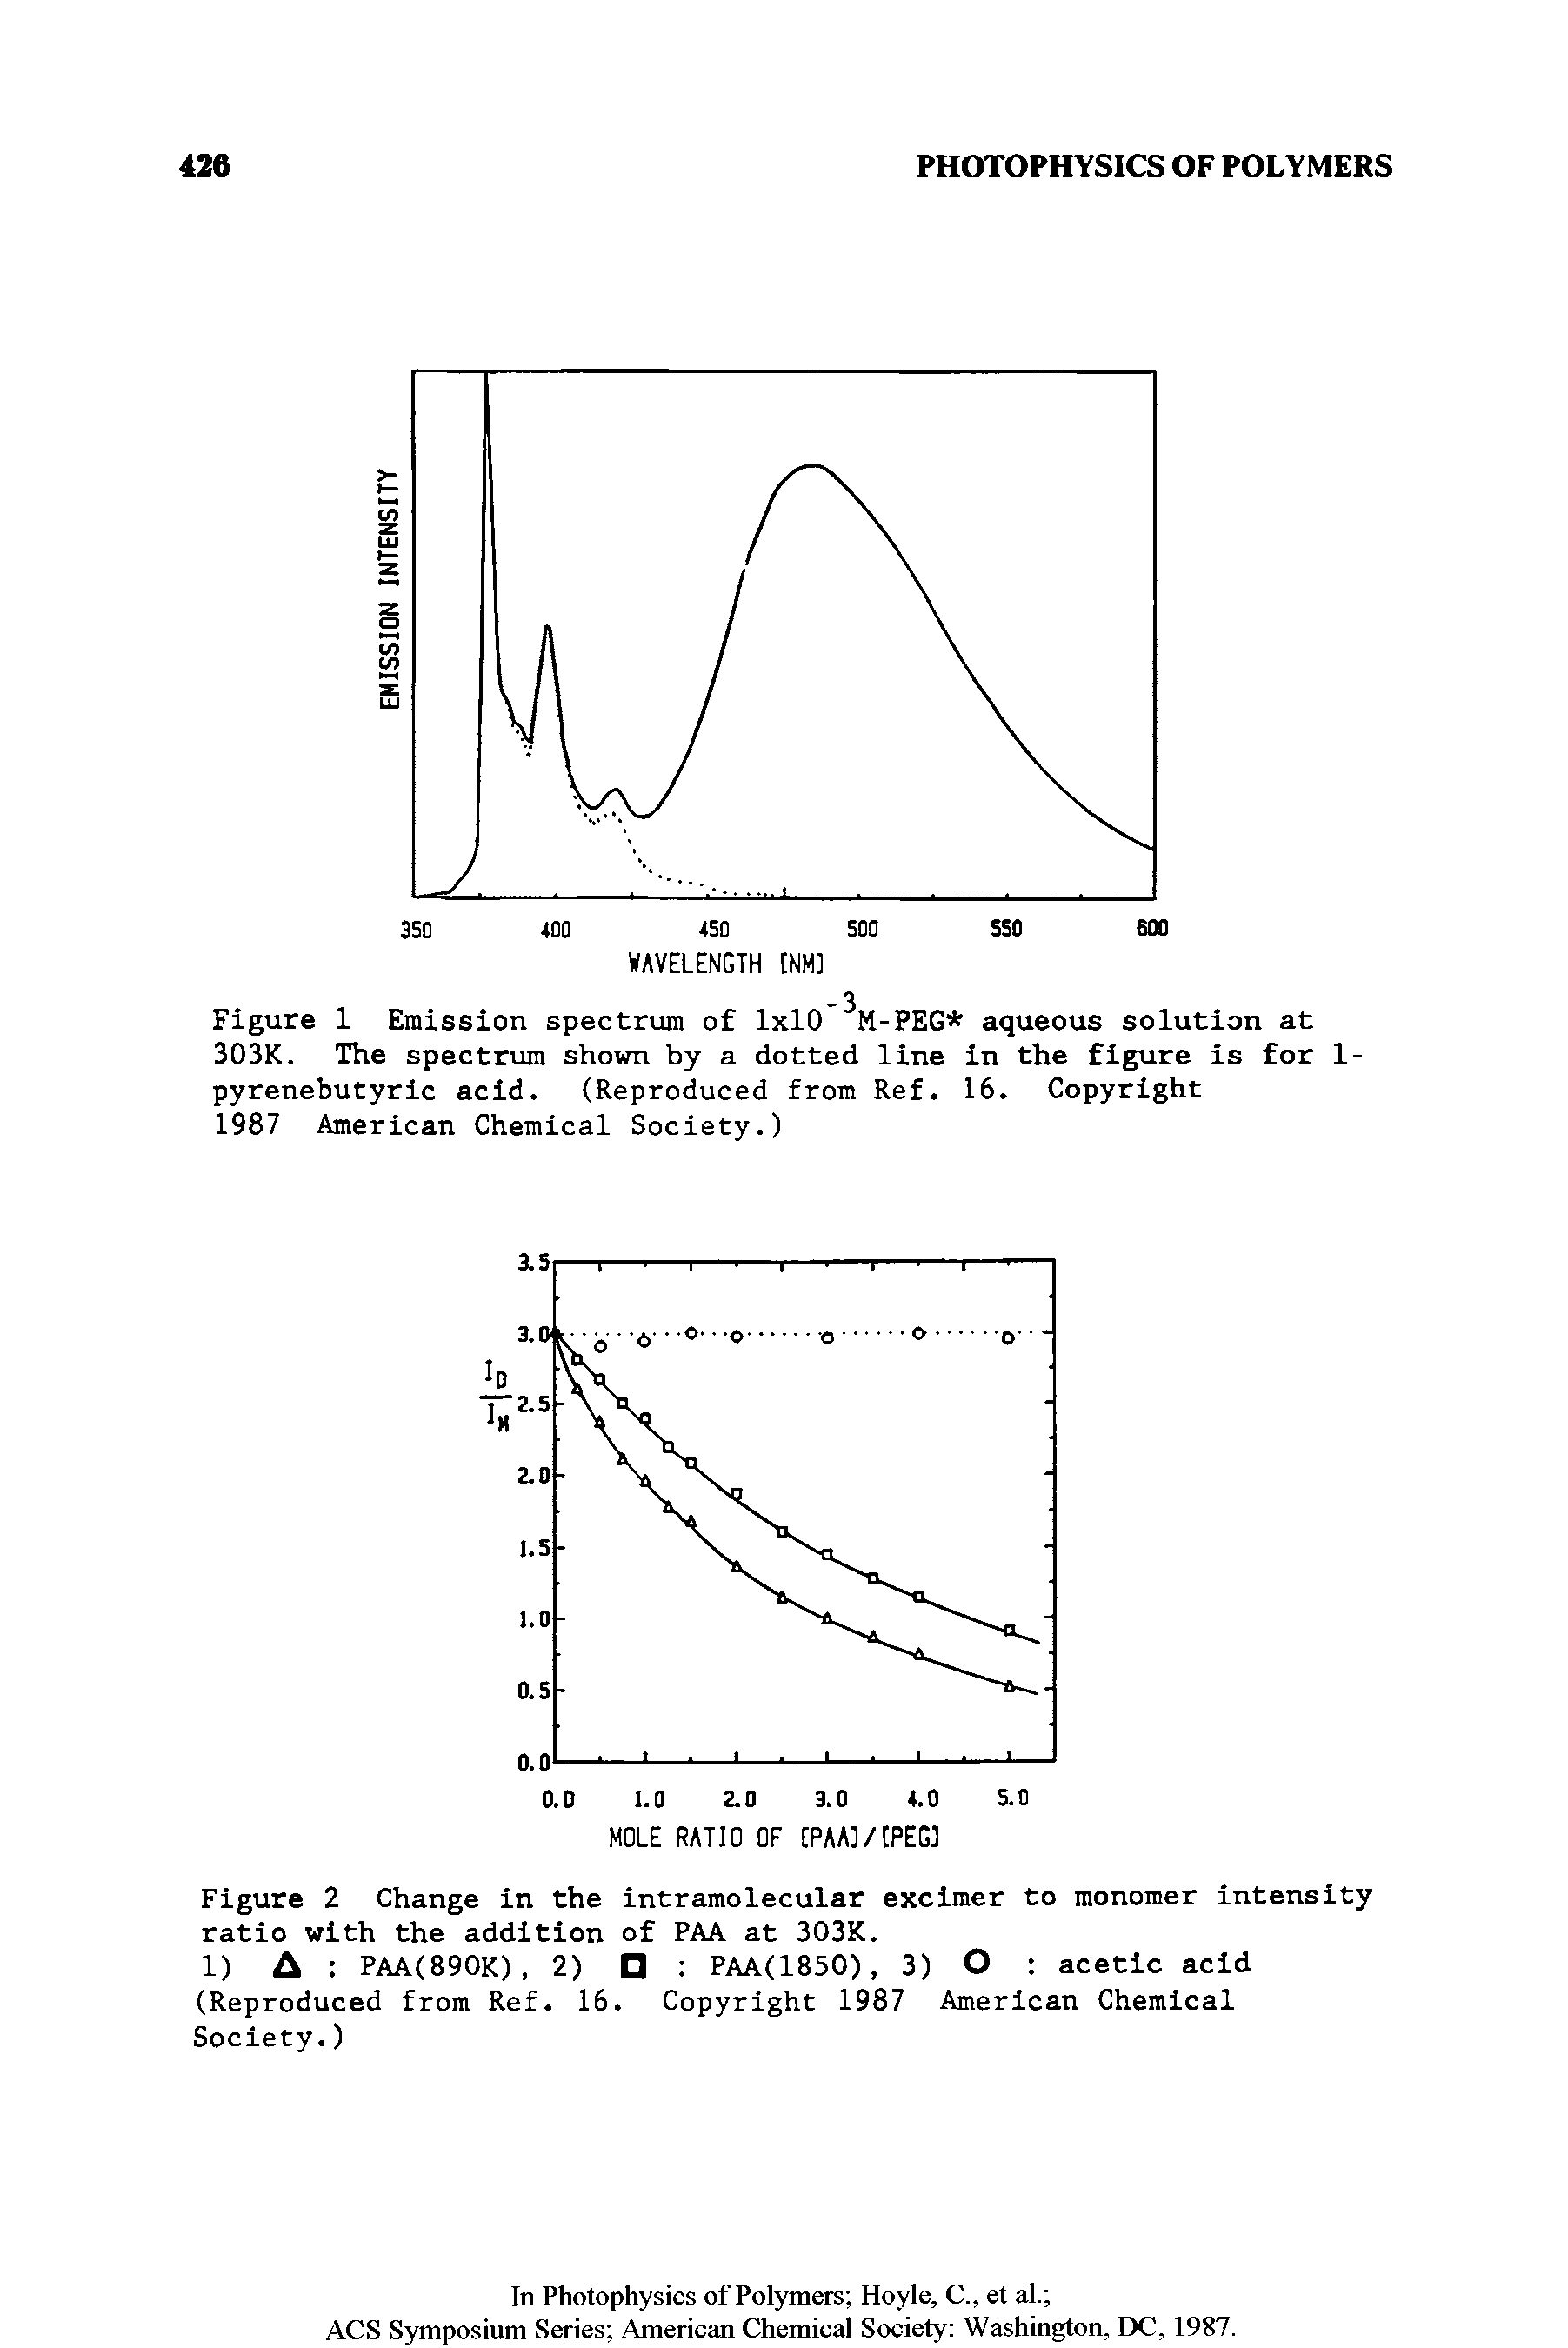 Figure 2 Change in the intramolecular excimer to monomer intensity ratio with the addition of PAA at 303K.